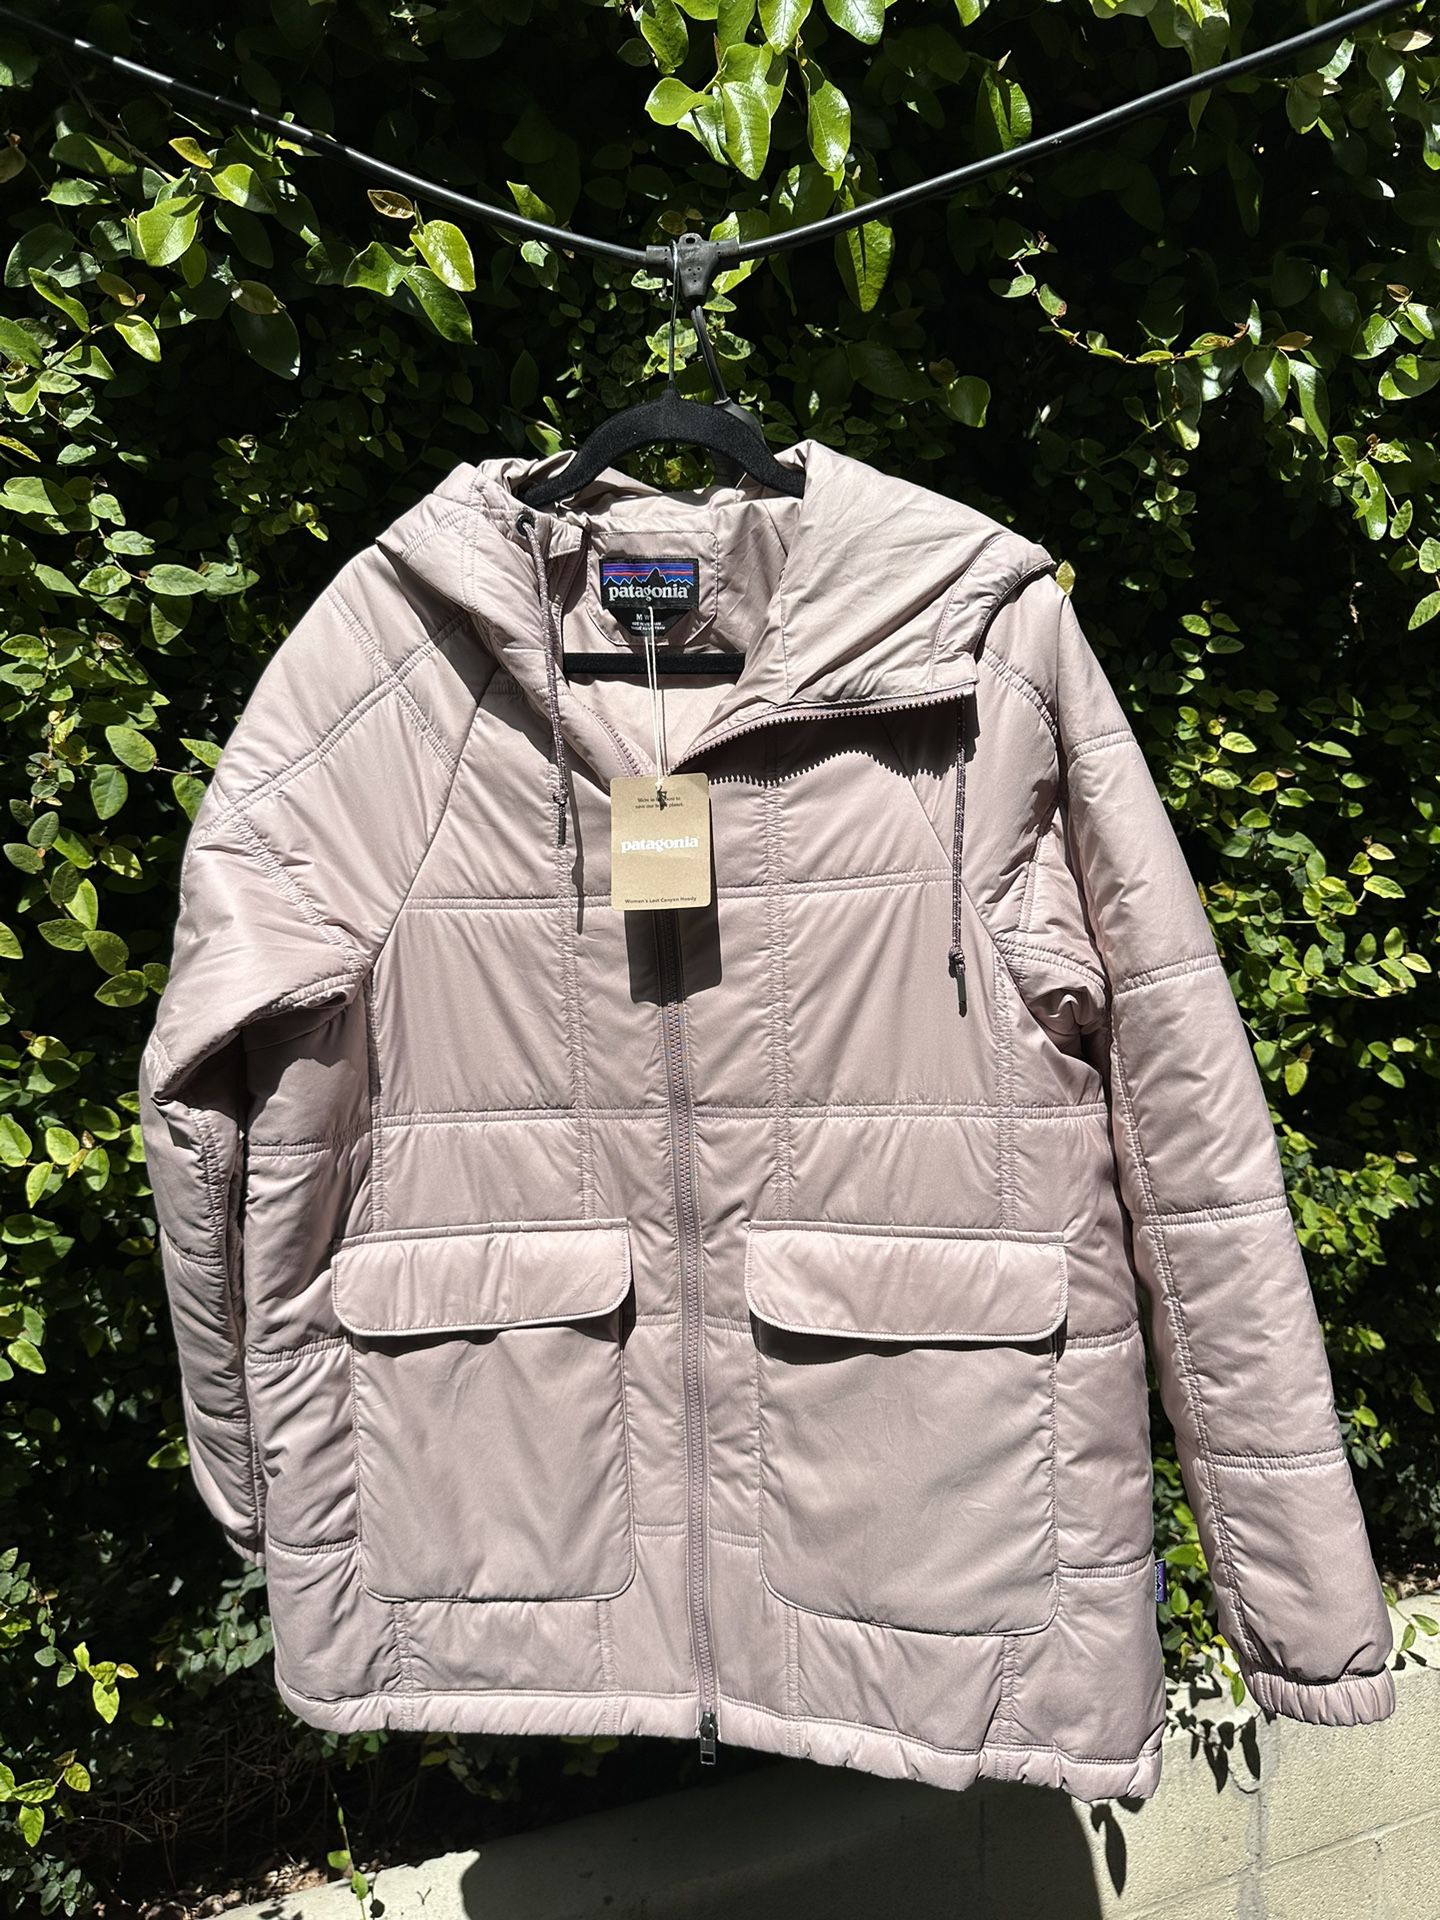 New: Patagonia Women’s Lost Canyon Jacket Size M